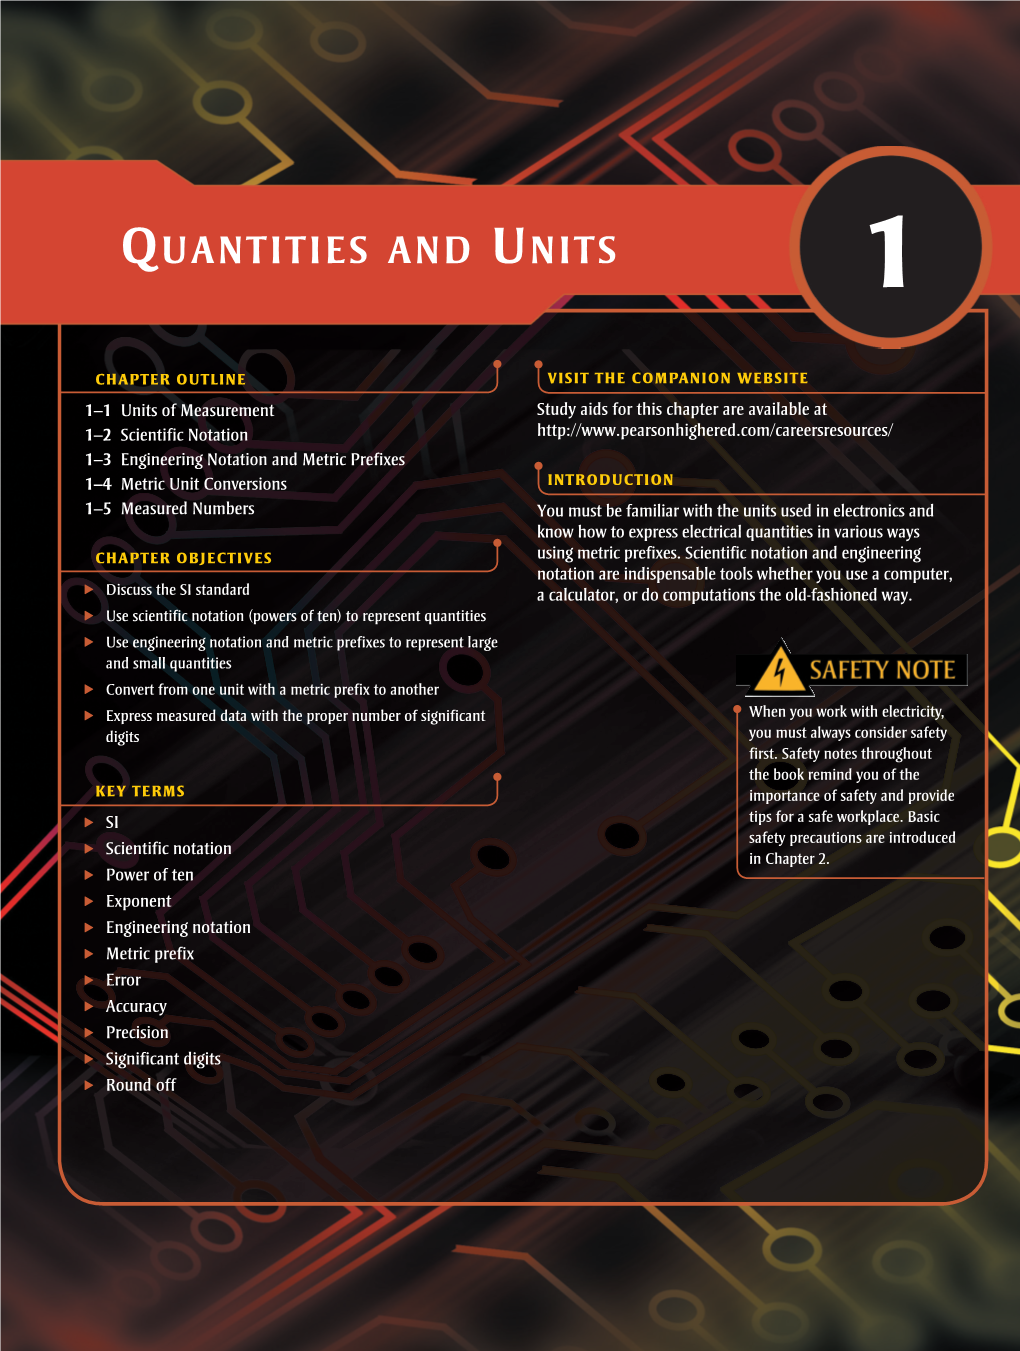 Quantities and Units 1